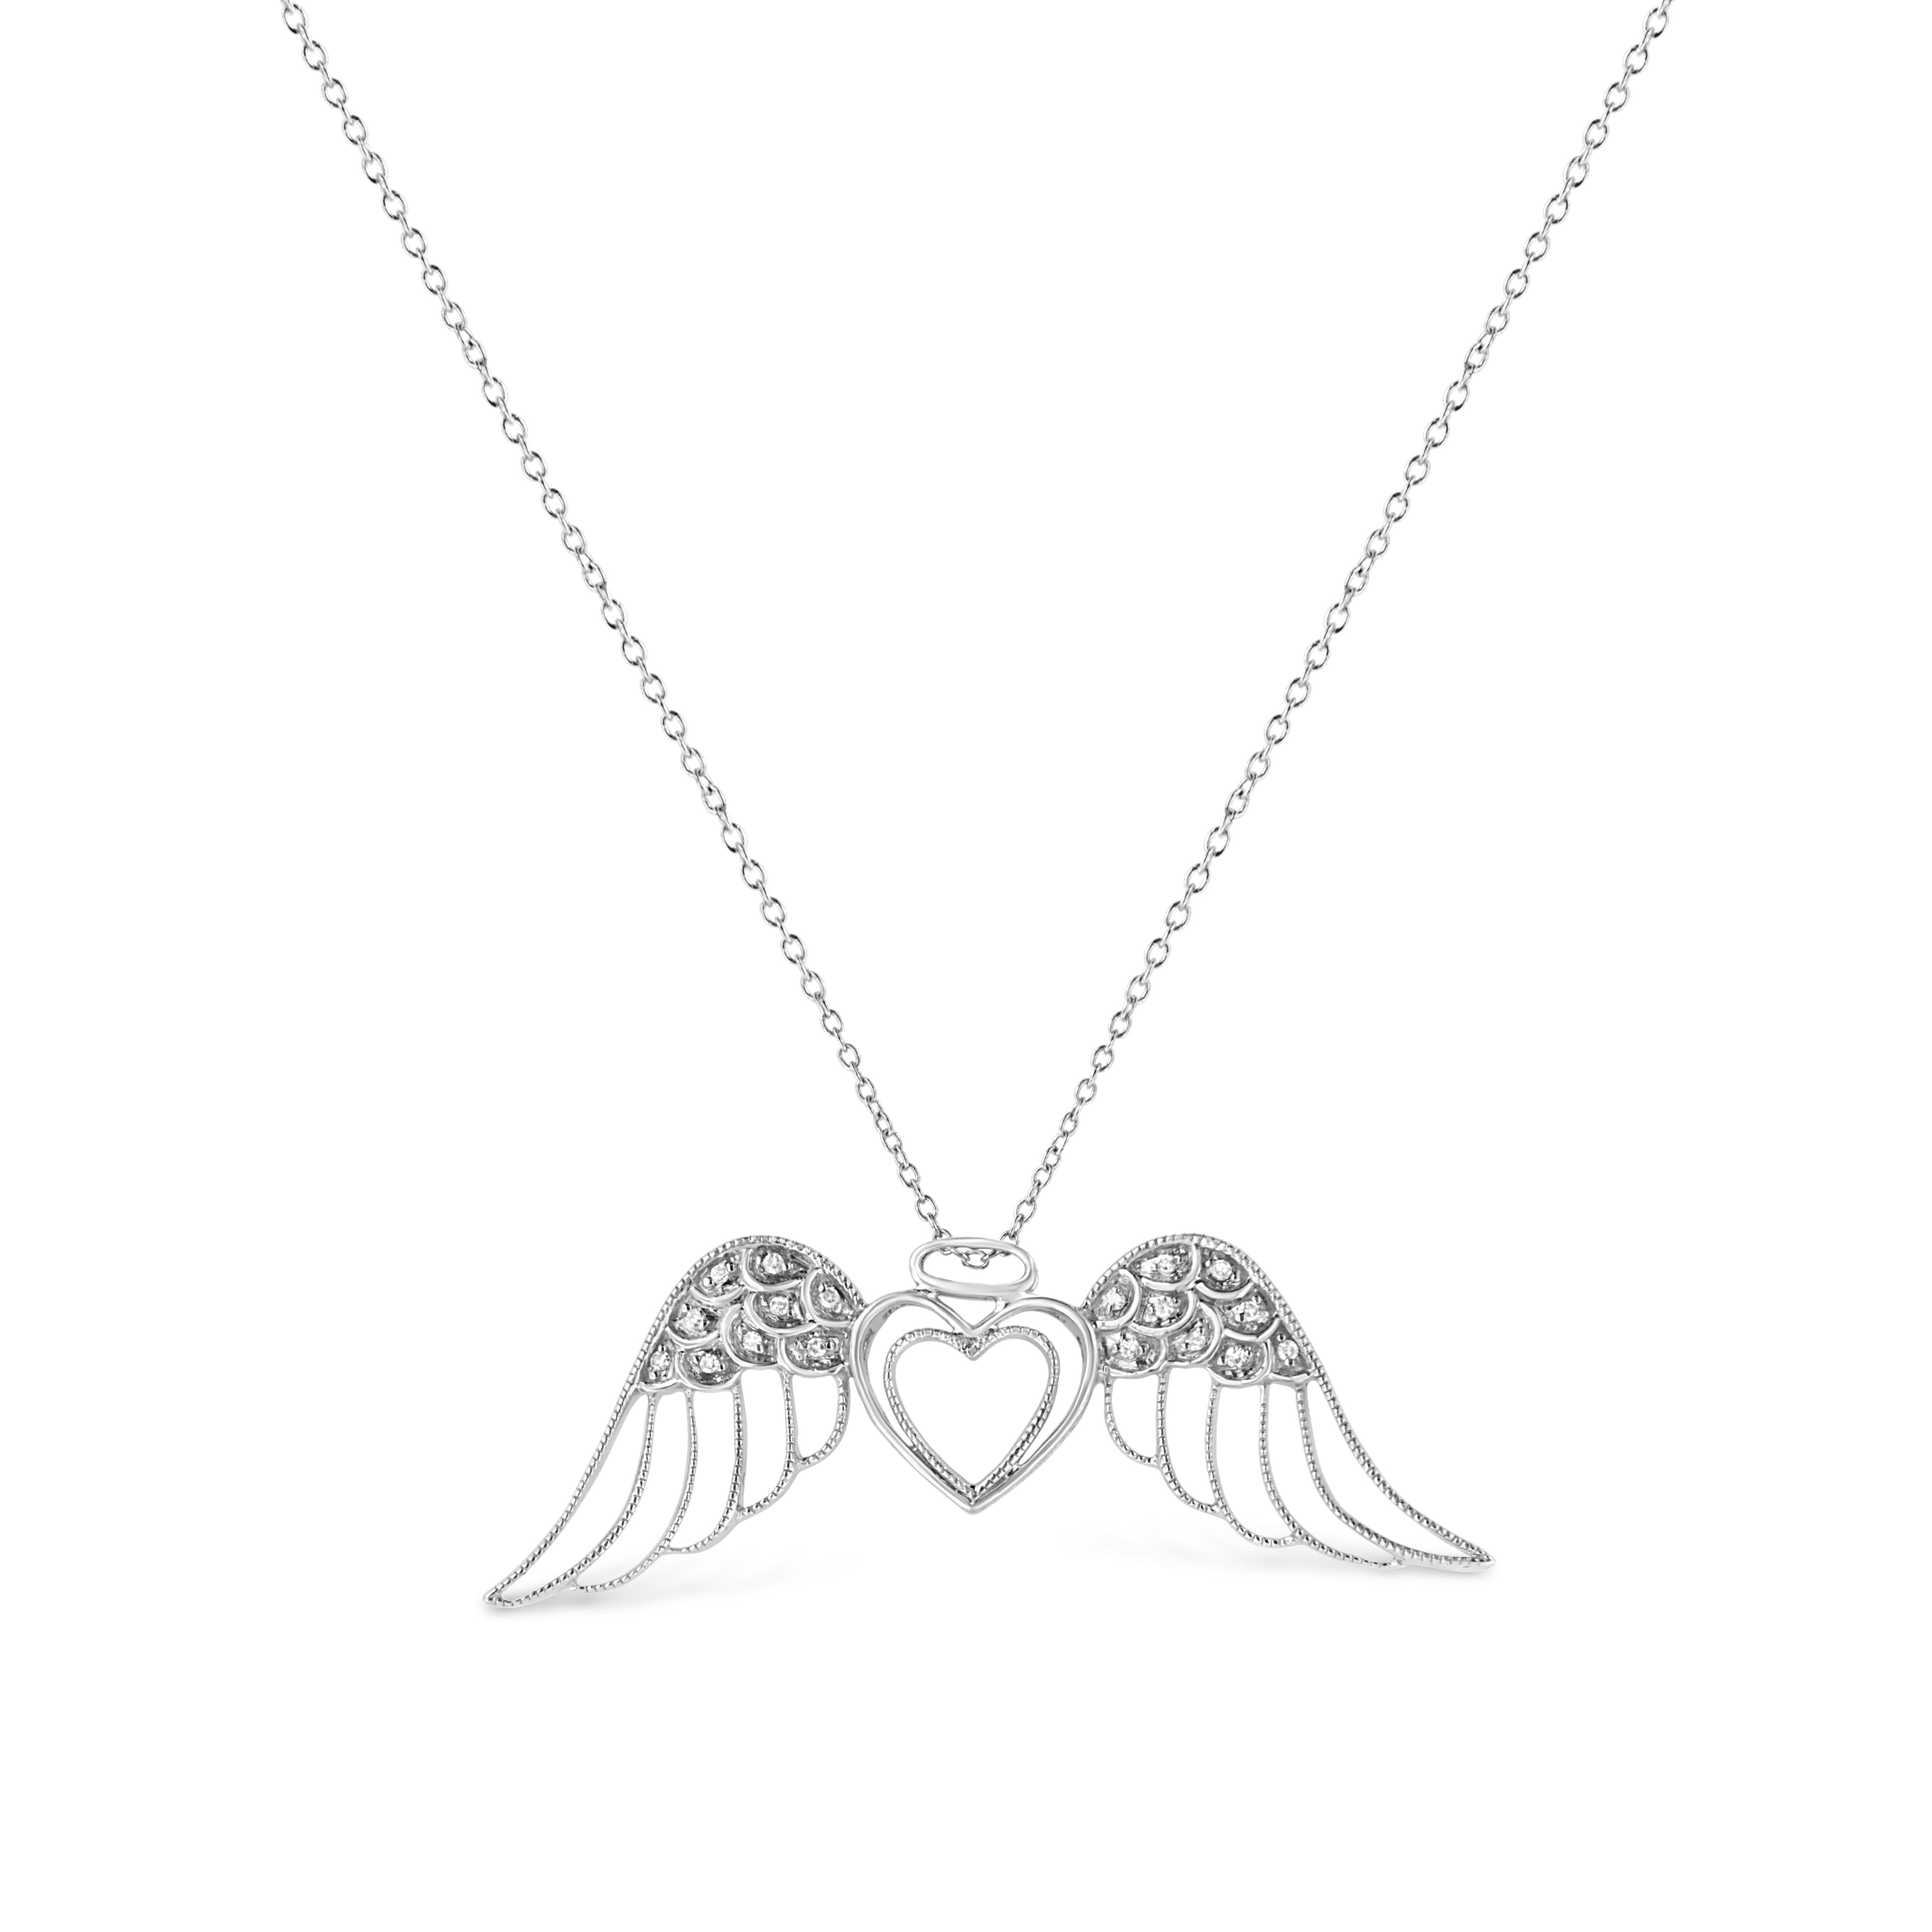 Present this sweet and stylish designed diamond angel wings to her. This sterling silver pendant features a glistening heart flies on brightly polished widespread angel's wings embellished with 18 pave set round cut diamonds. This whimsical pendant